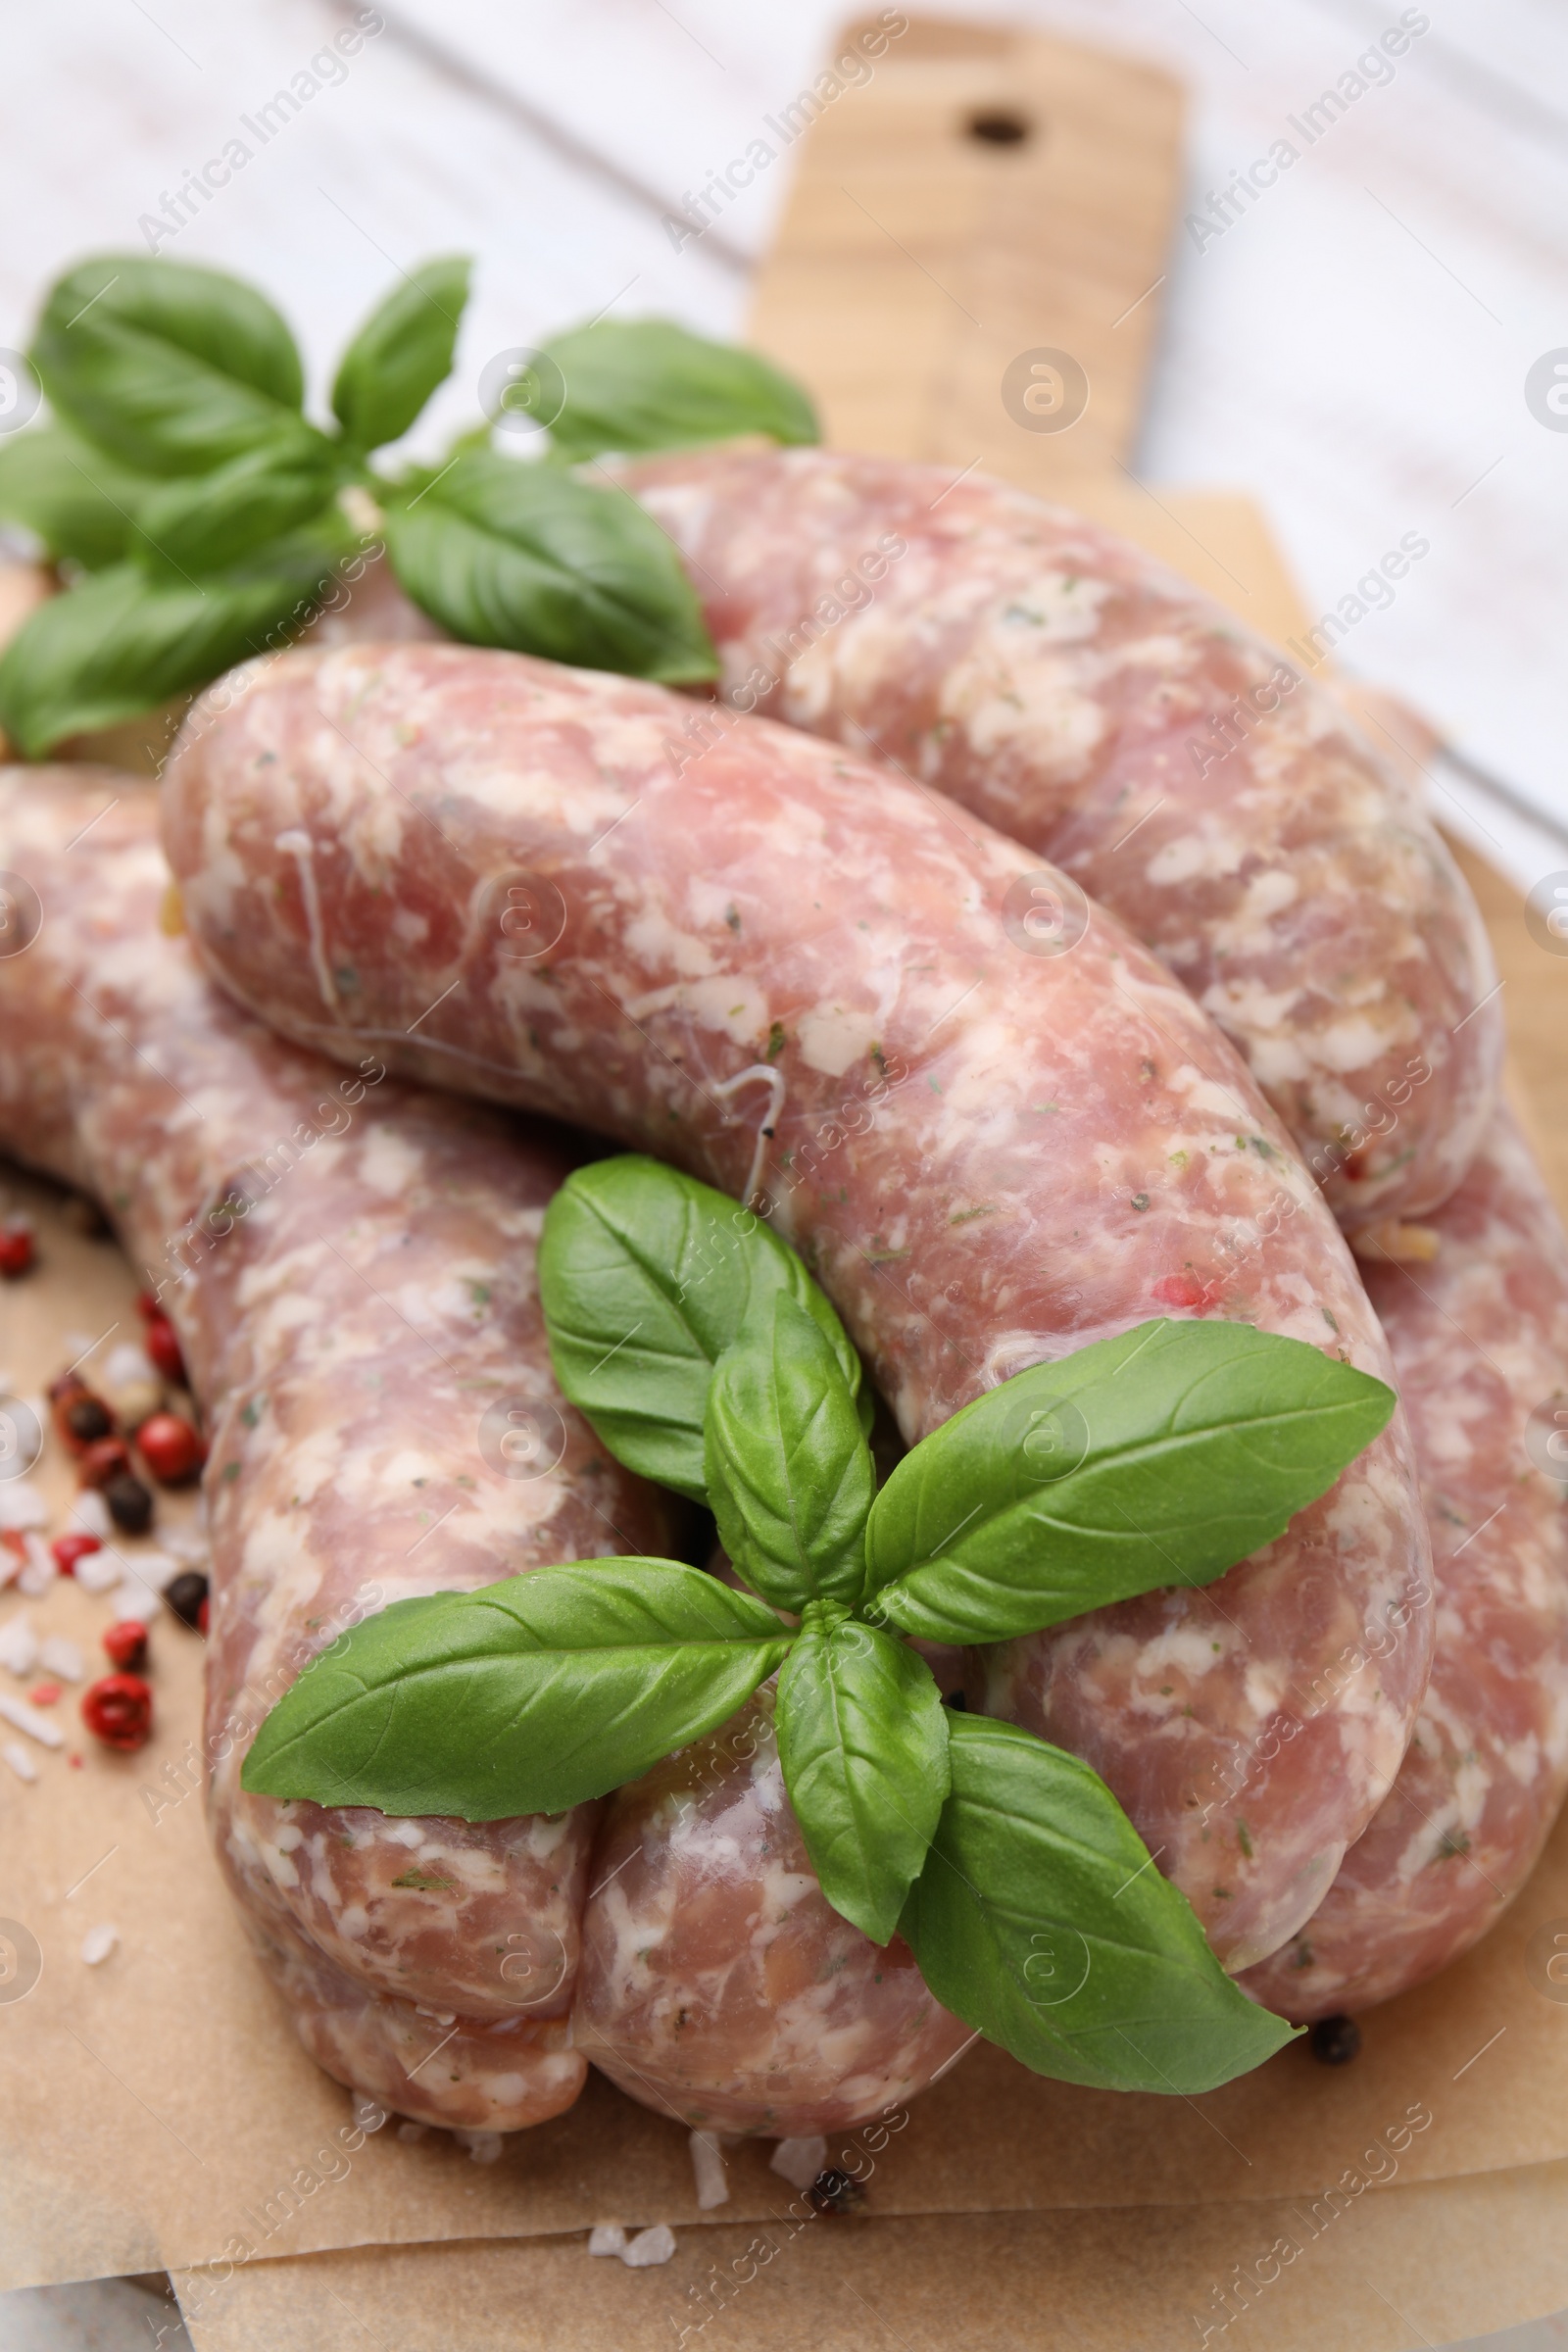 Photo of Raw homemade sausages and different spices on table, closeup